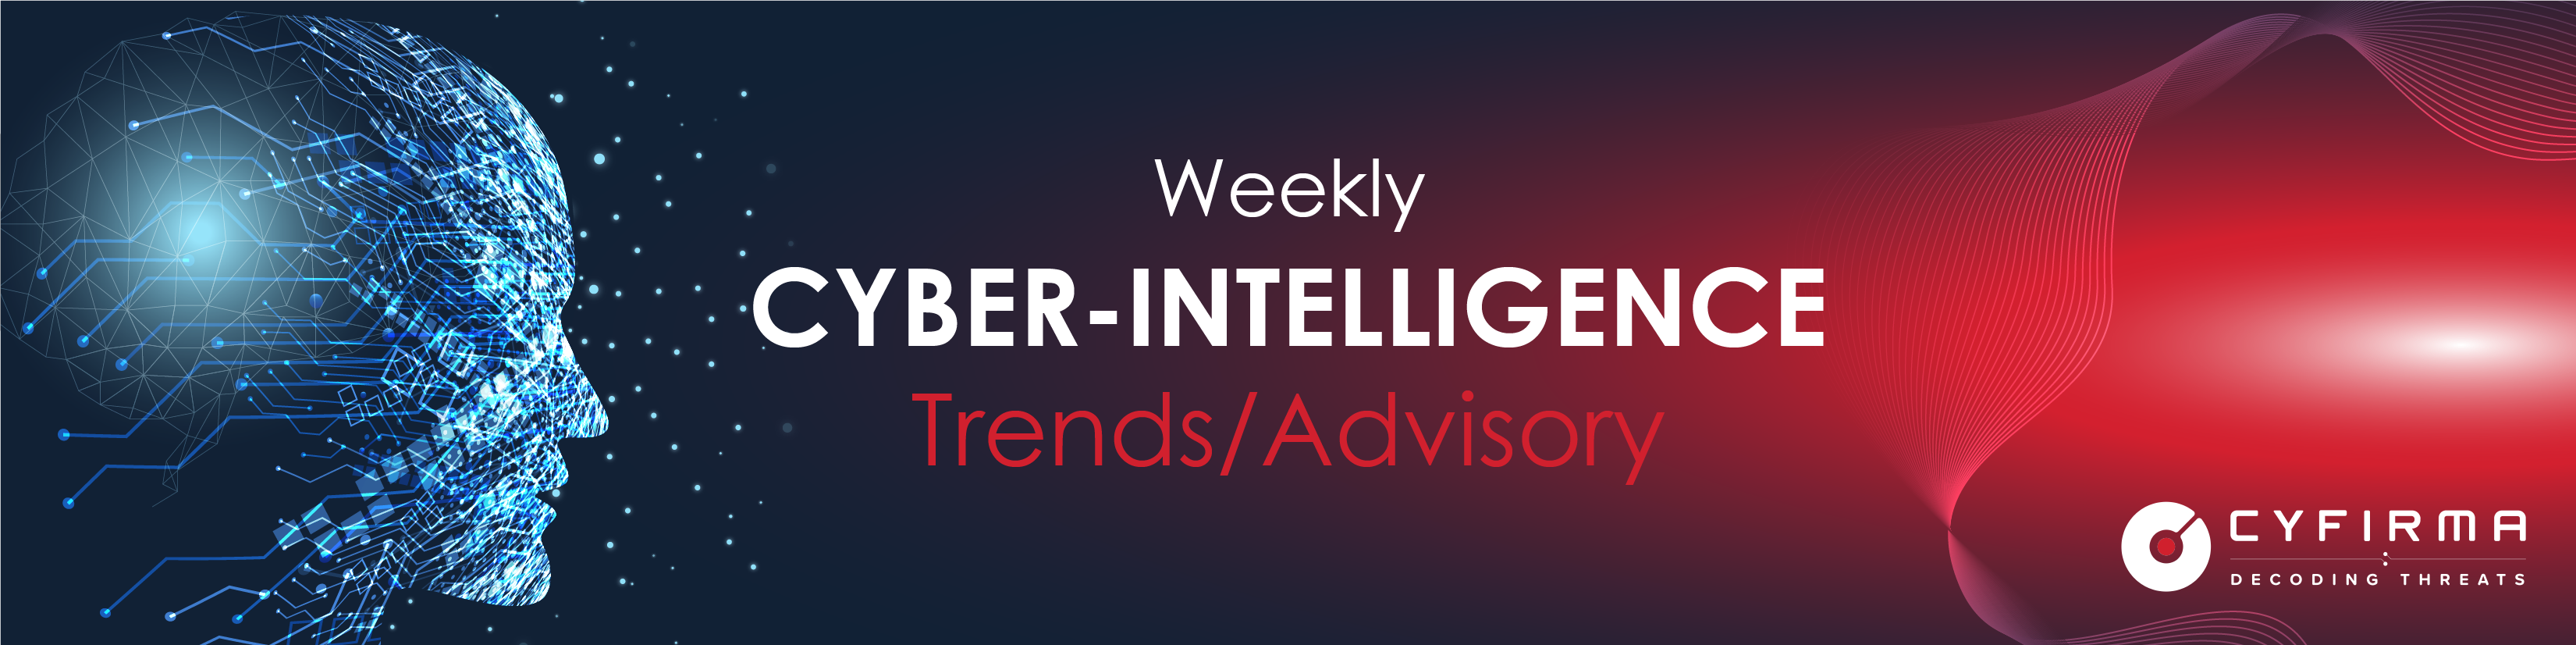 Weekly Intelligence Trends and Advisory | Threat Actor in Focus | Rise in Malware, Ransomware, Phishing | Vulnerability and Exploits – 28 Nov 2021